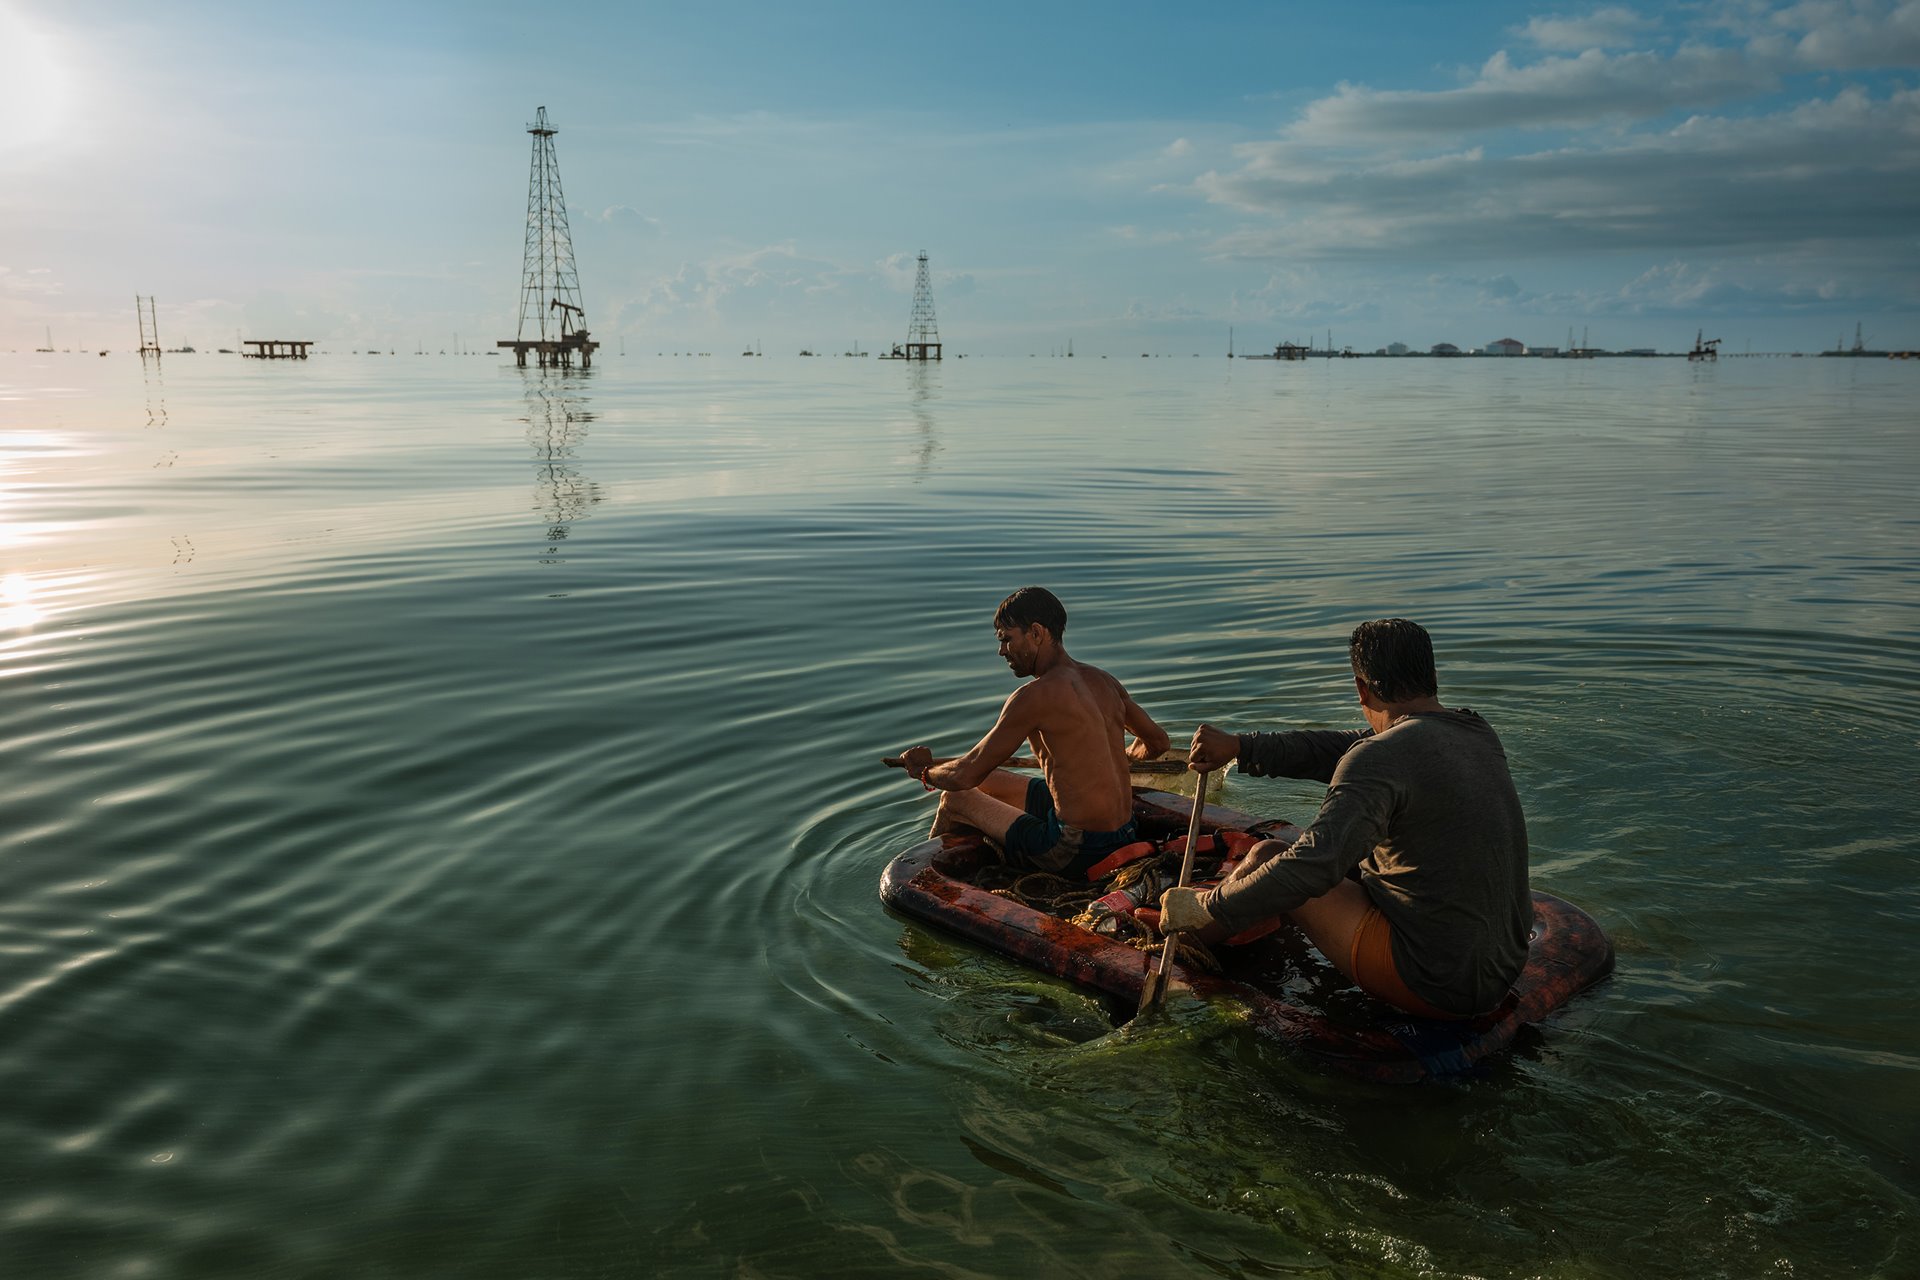 Two fishermen paddle through the green waters of Lake Maracaibo, Cabimas, Venezuela, which along with oil, has become covered with algae caused by discharged fertilizers, sewage, and other chemicals. The fish they catch are sometimes stained with crude oil, and fishermen are forced to clean it with gasoil before eating it.